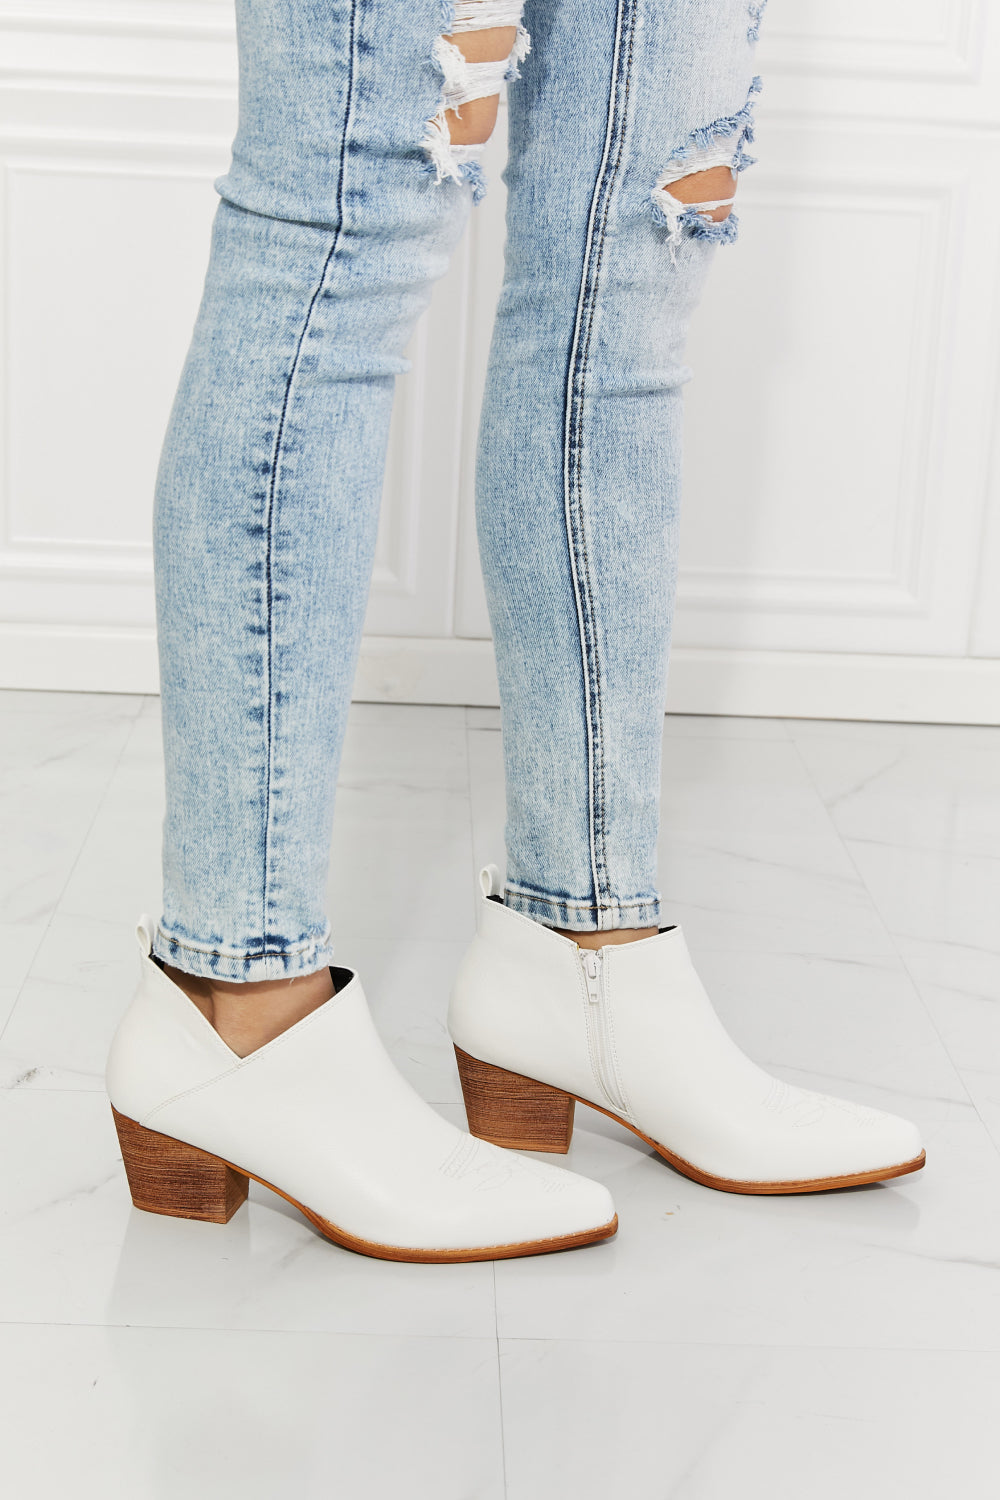 MMShoes Trust Yourself Embroidered Crossover Cowboy Bootie in White - BEAUTY COSMOTICS SHOP